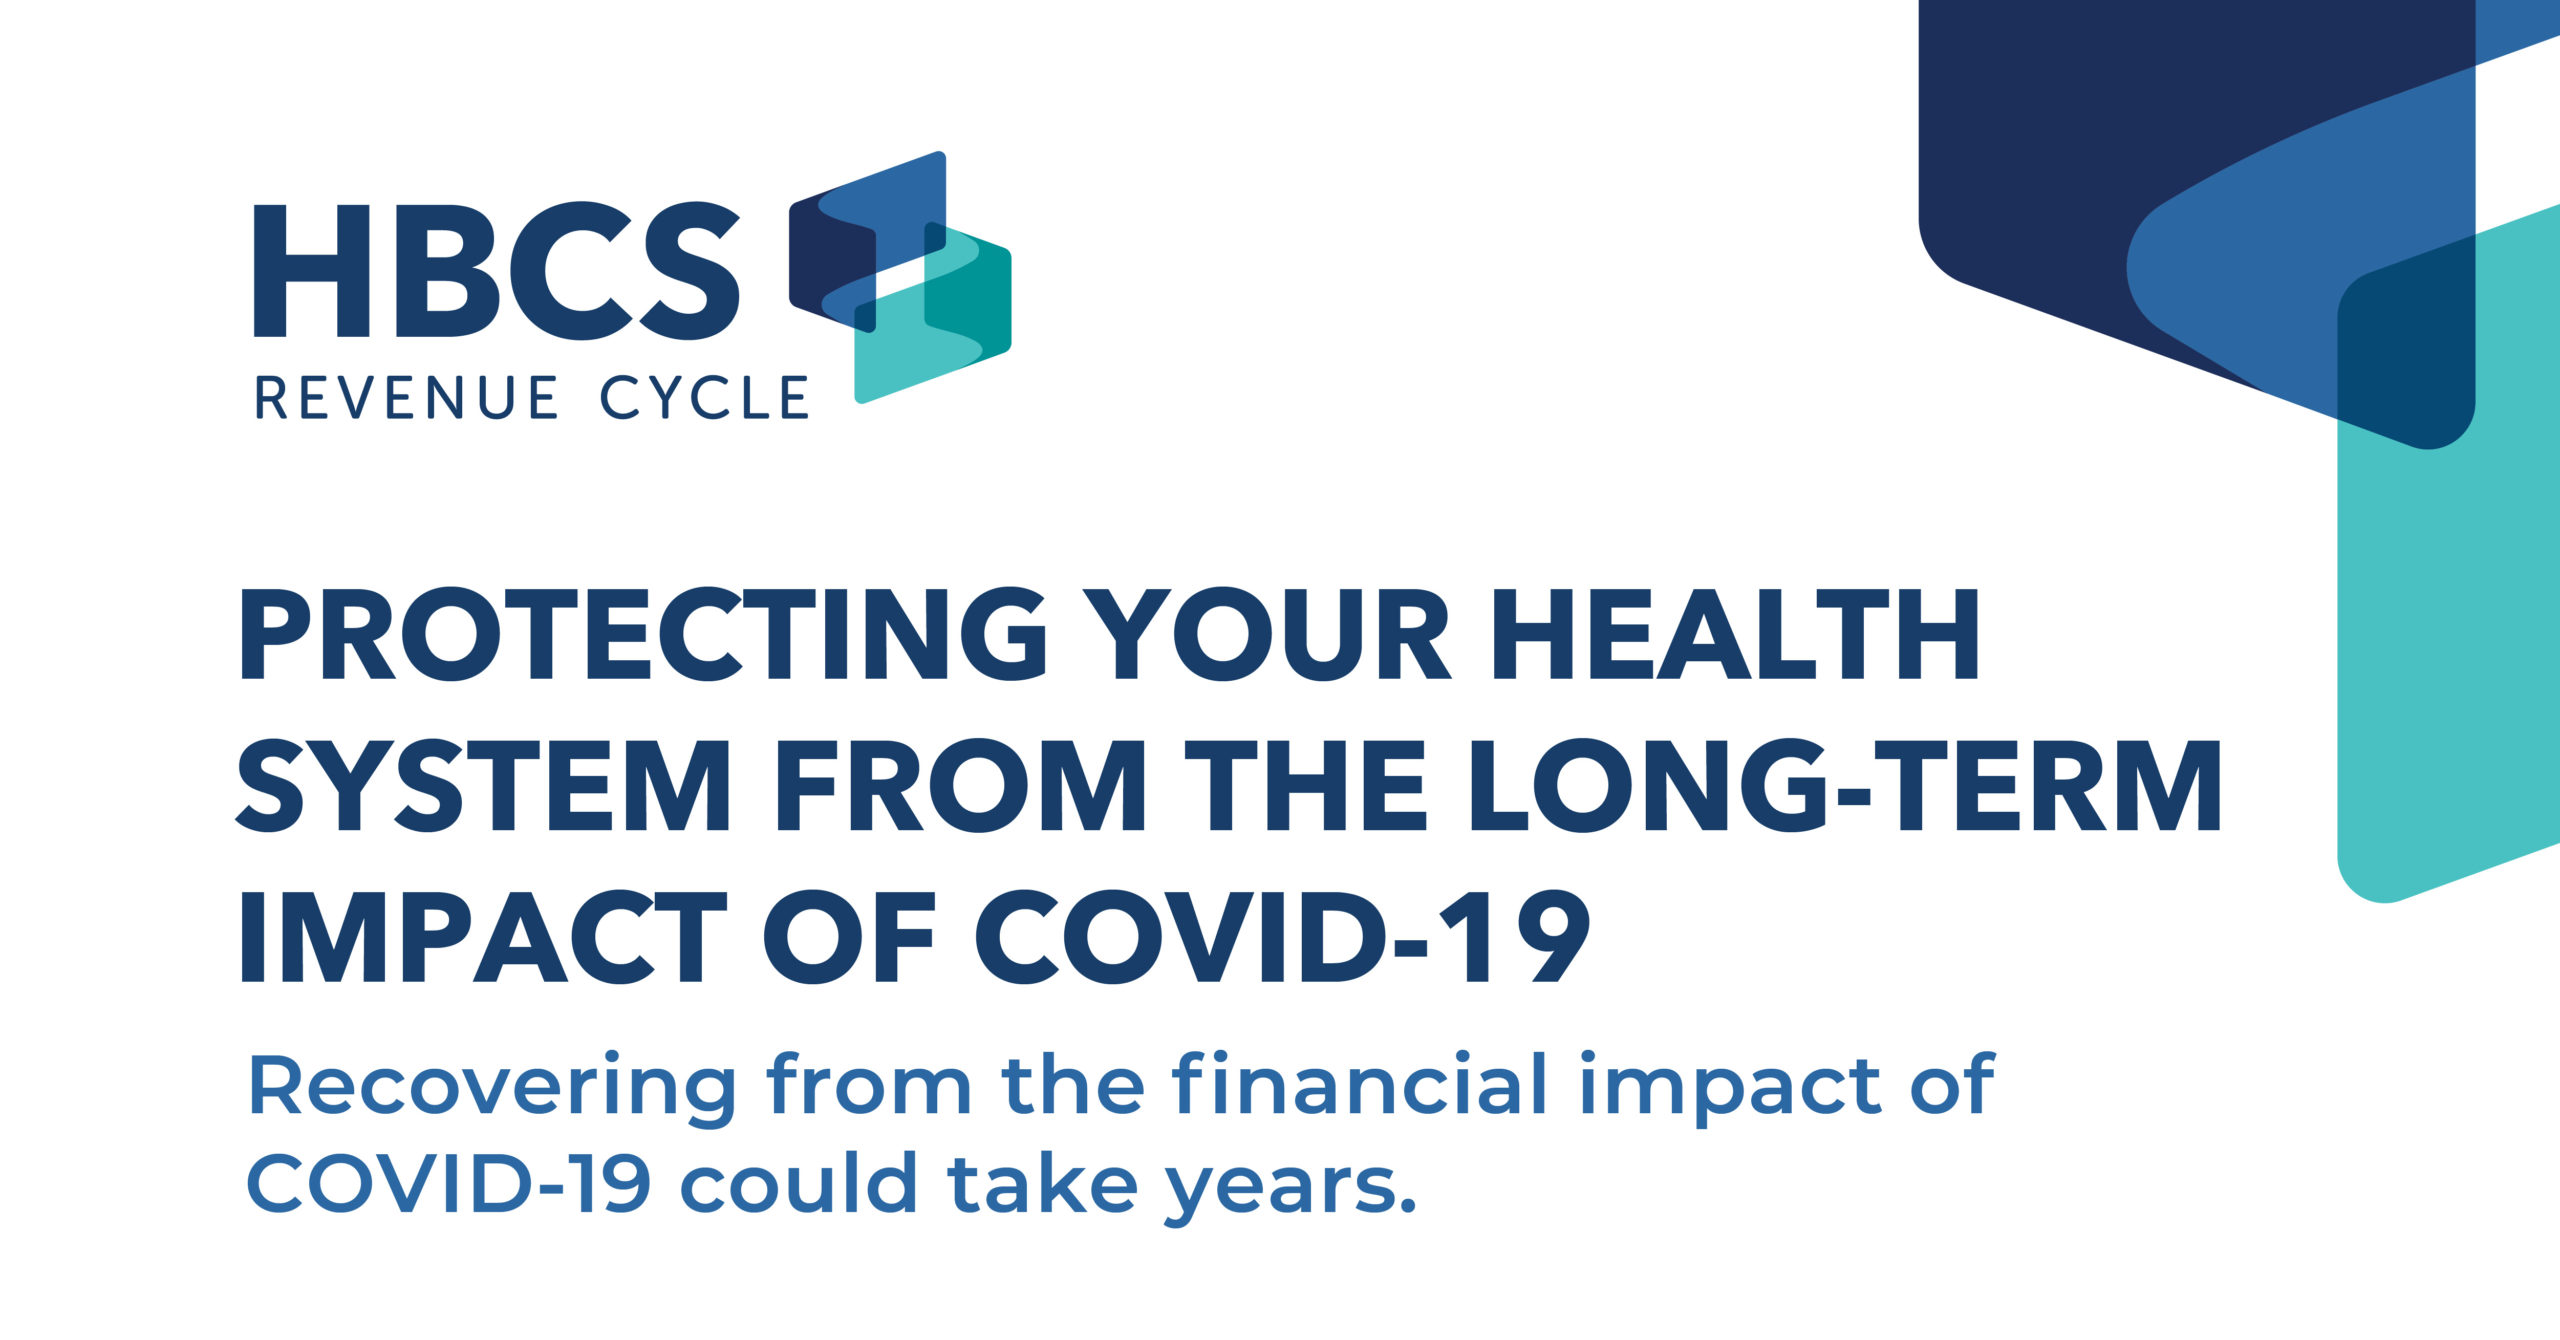 Protecting Your Health System From the Long-Term Impact of COVID-19